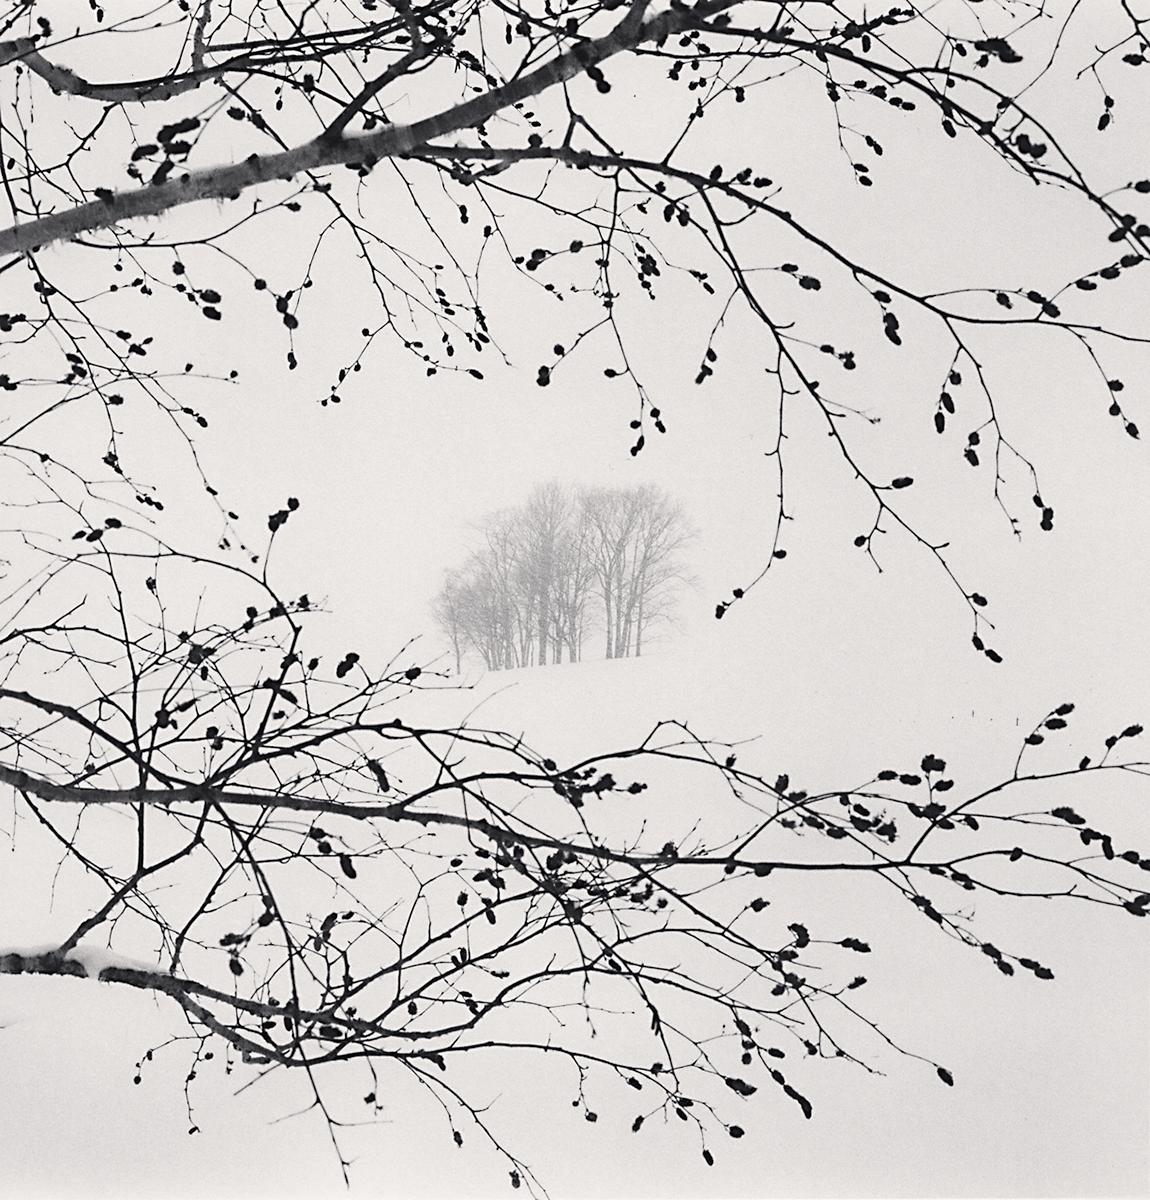 Distant Trees, Sorachi, Hokkaido, Japan by Michael Kenna is a 8 x 7.75 inch* silver gelatin print, available in an edition of 25.
*Please note: the measurements of this print are approximated
This photograph is signed, titled, negative date, print